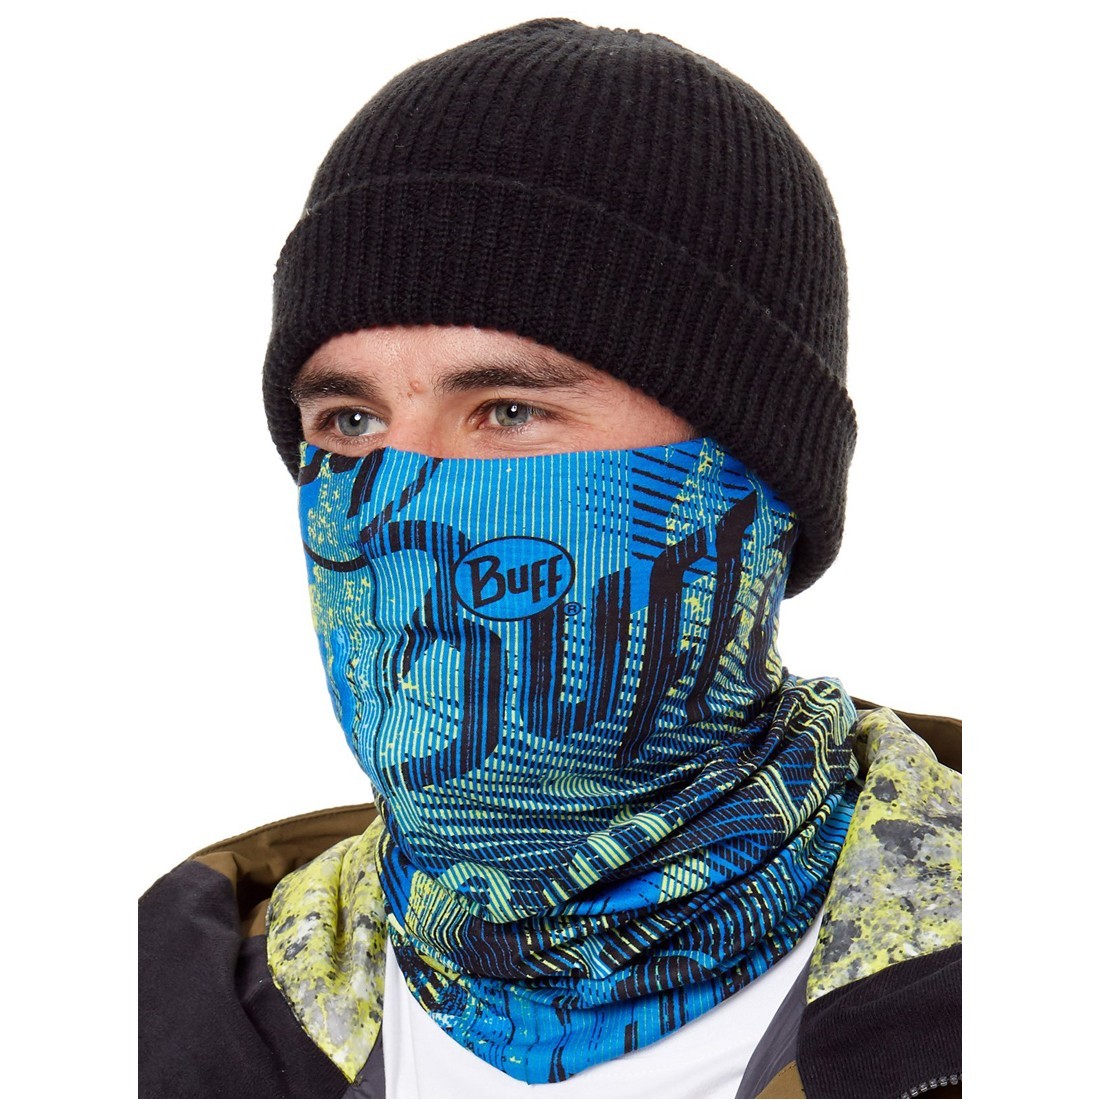 Buy Buff UV Protection - Flash Logo Multi - Buff, delivered to your home |  The Outfit